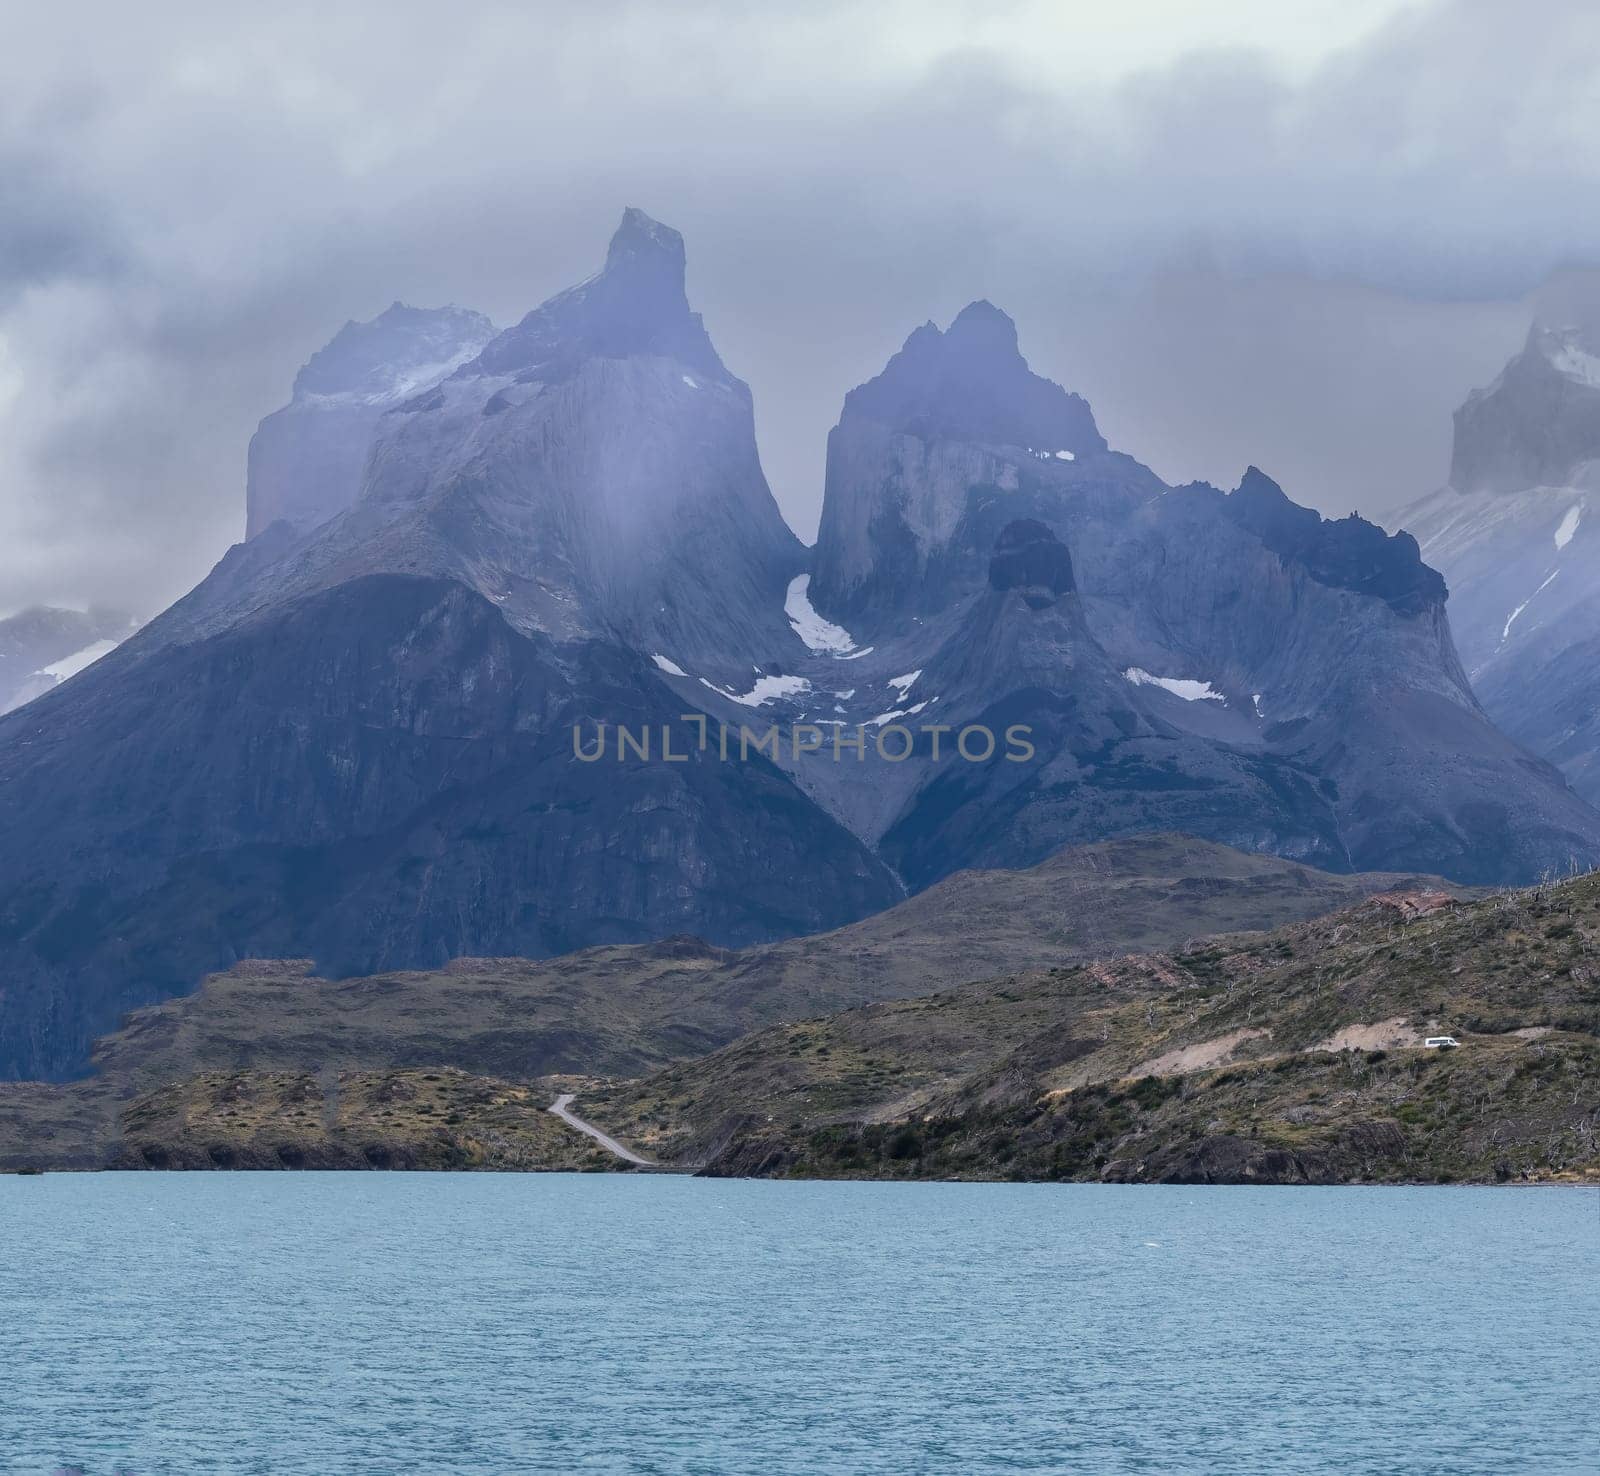 Dramatic mountains rise above a calm turquoise lake under moody skies.